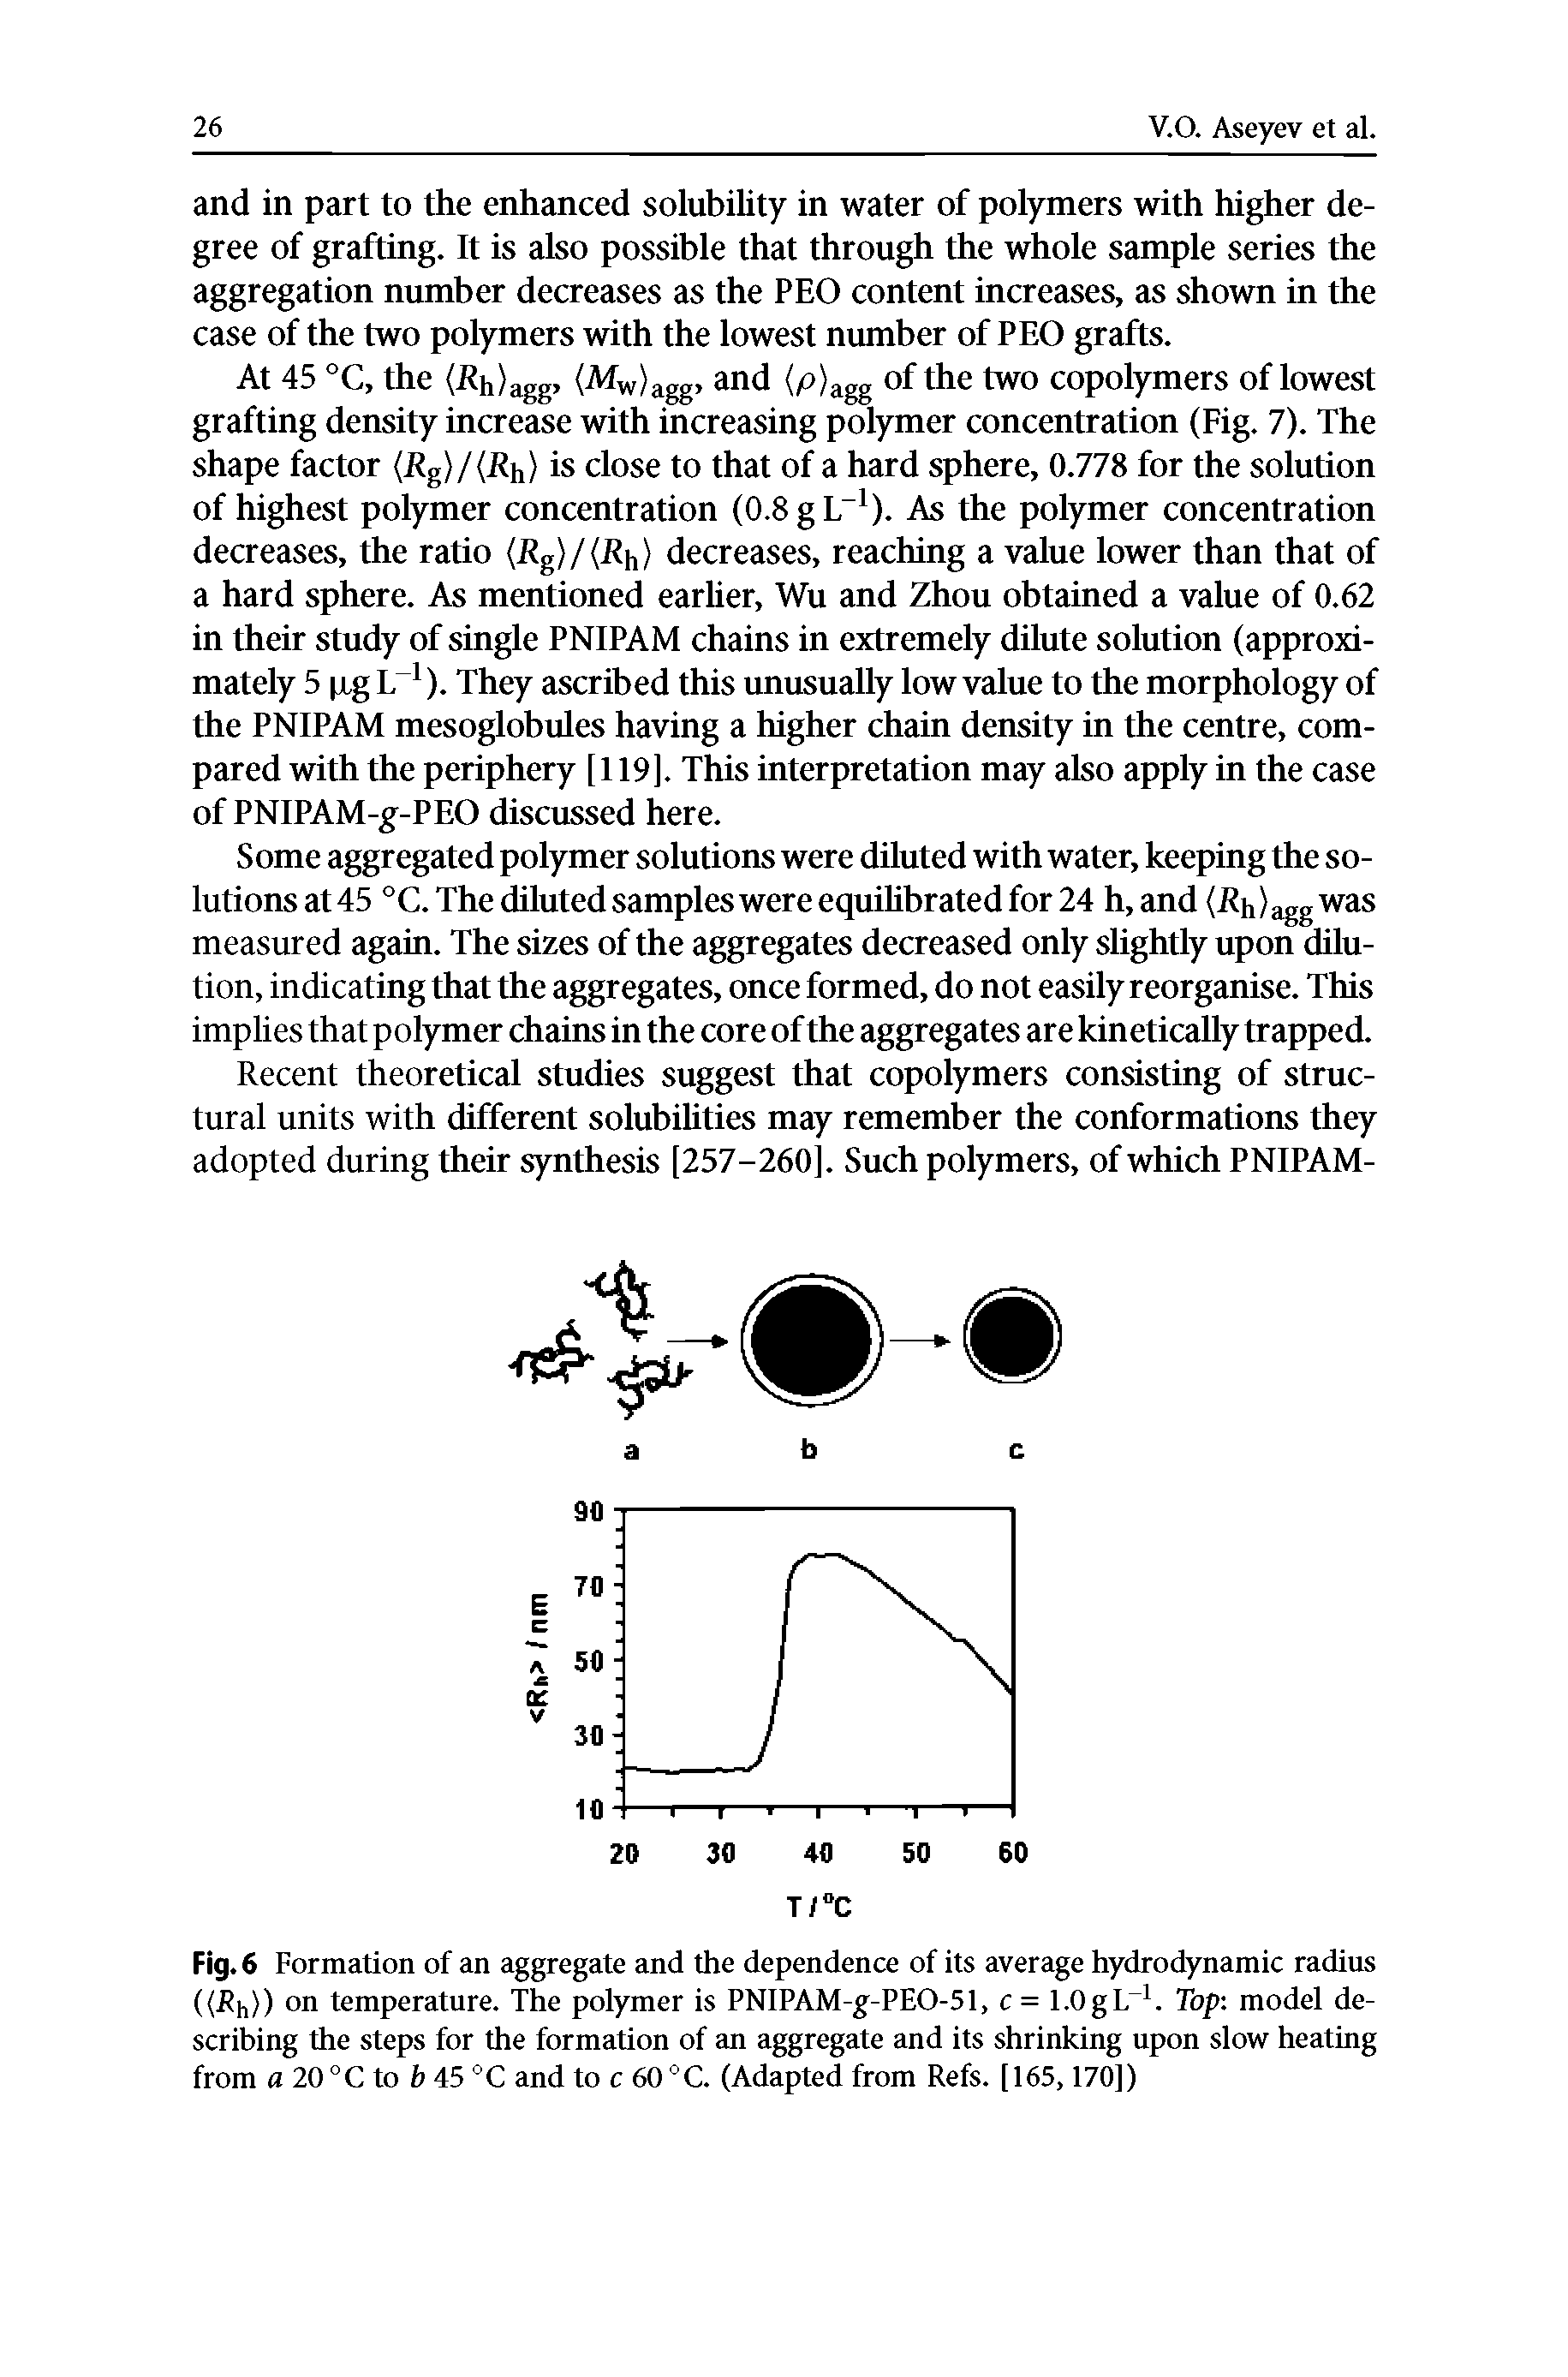 Fig. 6 Formation of an aggregate and the dependence of its average hydrodynamic radius ((Rh ) on temperature. The polymer is PNIPAM-g-PEO-51, c= 1.0gI.. Top model describing the steps for the formation of an aggregate and its shrinking upon slow heating from a 20 °C to b 45 °C and to c 60 °C. (Adapted from Refs. [165,170])...